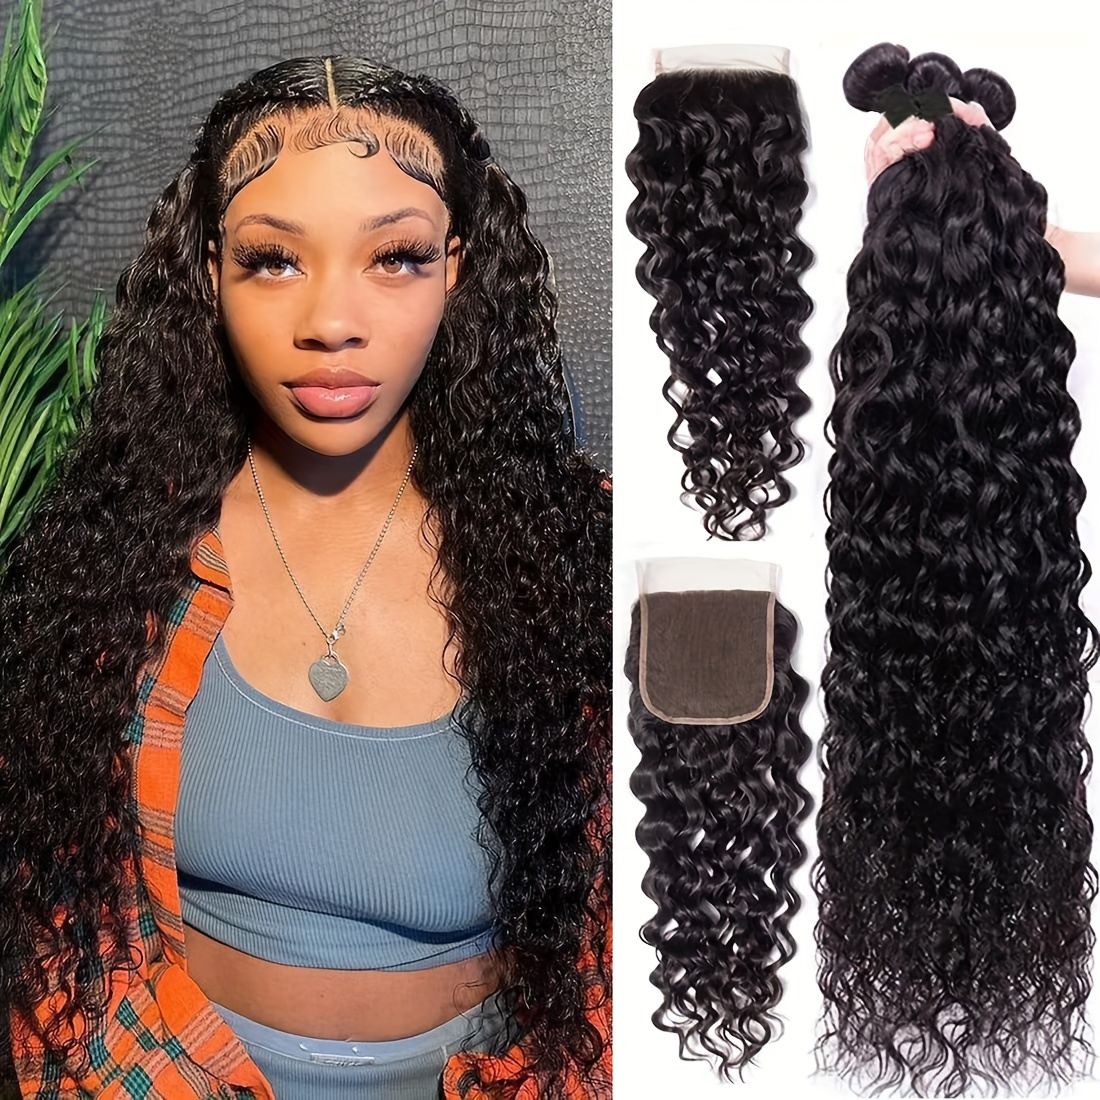 

Water Wave 3 Bundles Human Hair With 4x4 Lace Closure Human Hair Curly Weave Bundles Human Hair Water Wave Human Hair Bundles Natural Color